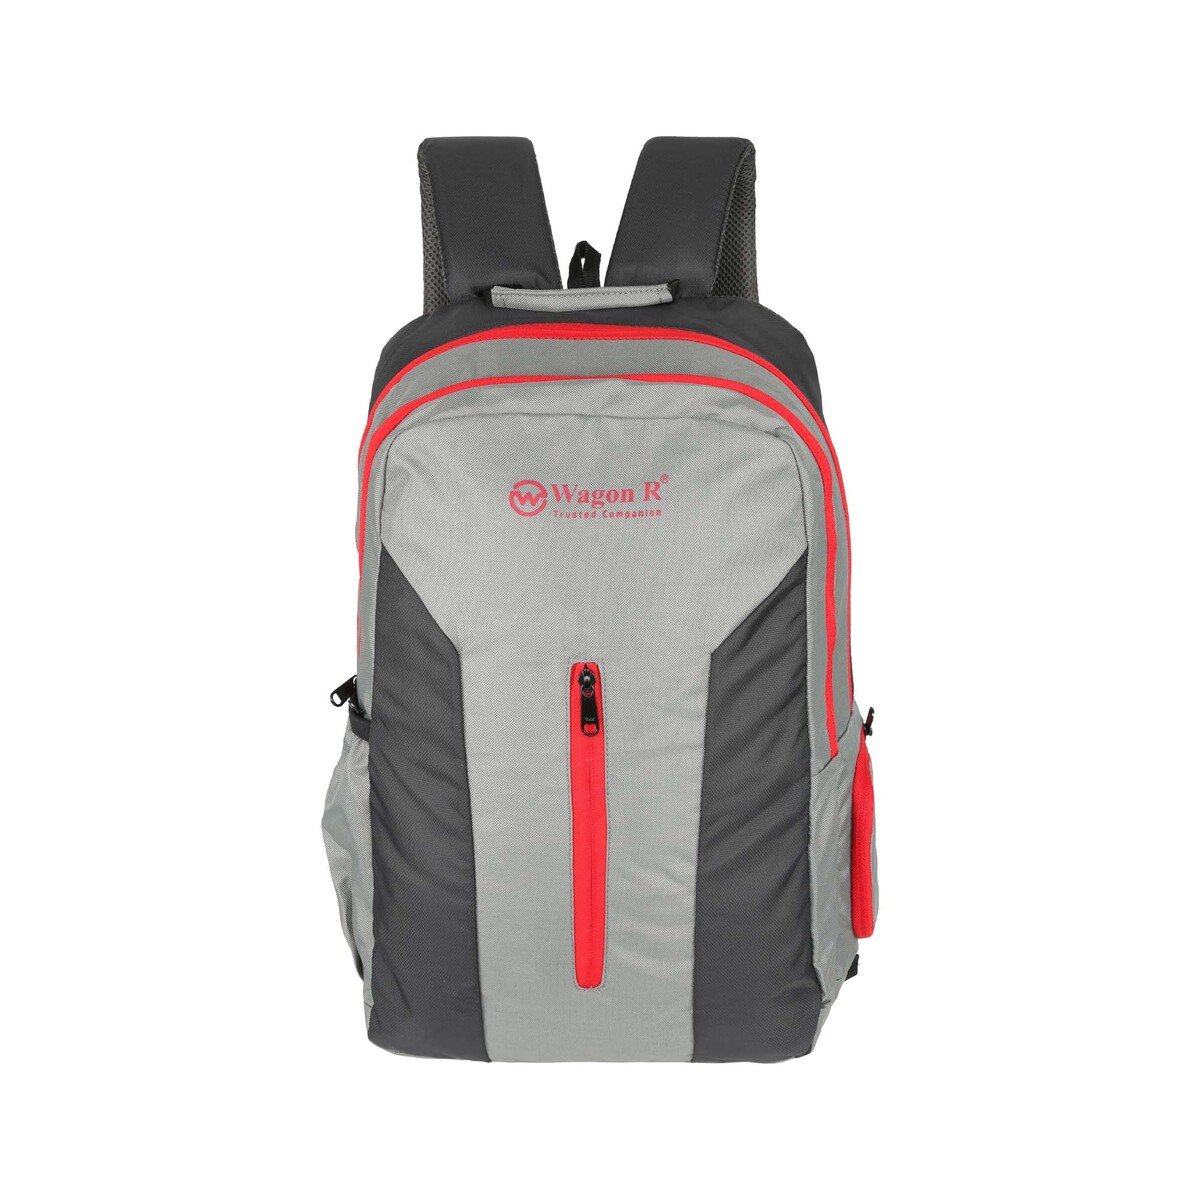 Wagon-R Explore Backpack CHIK 19 Inch